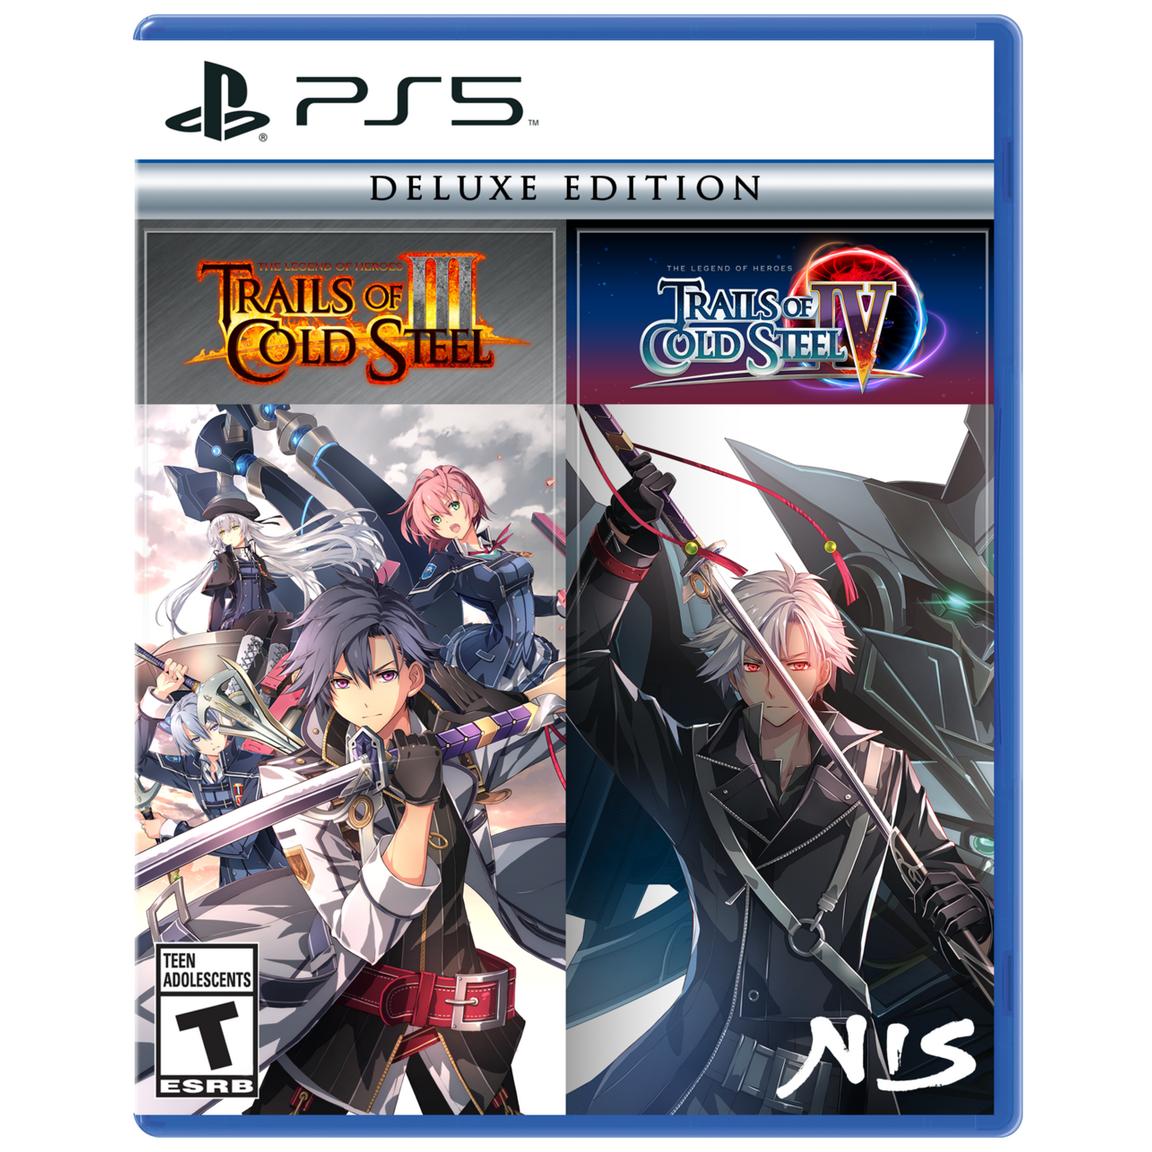 Видеоигра The Legend of Heroes: Trails of Cold Steel III / The Legend of Heroes: Trails of Cold Steel IV - Deluxe Edition - PlayStation 5